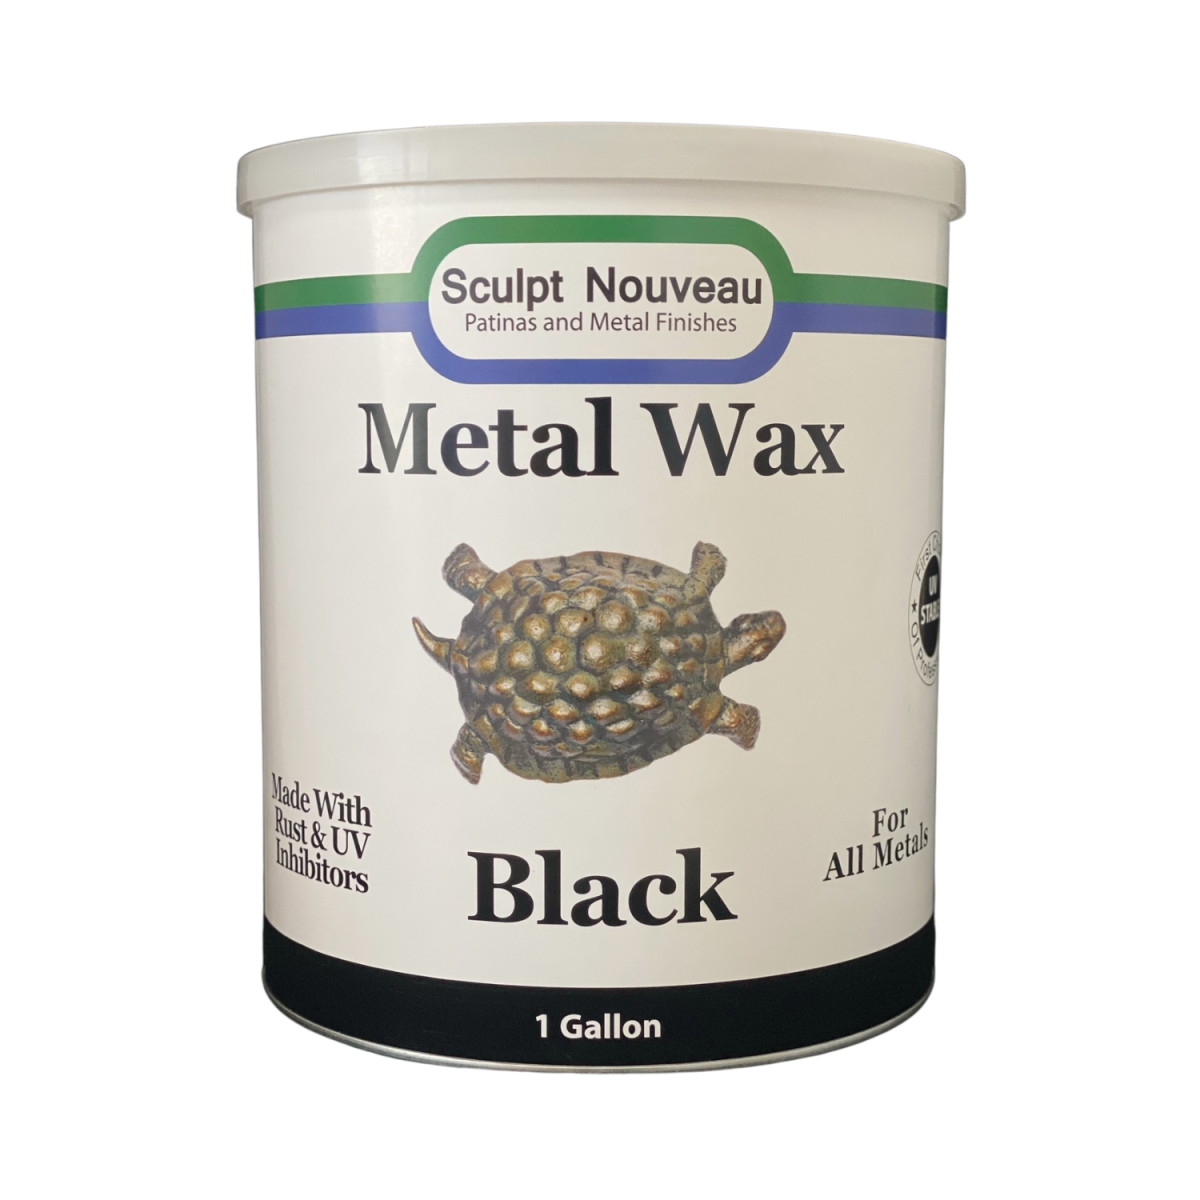 Black Wax For All Metals